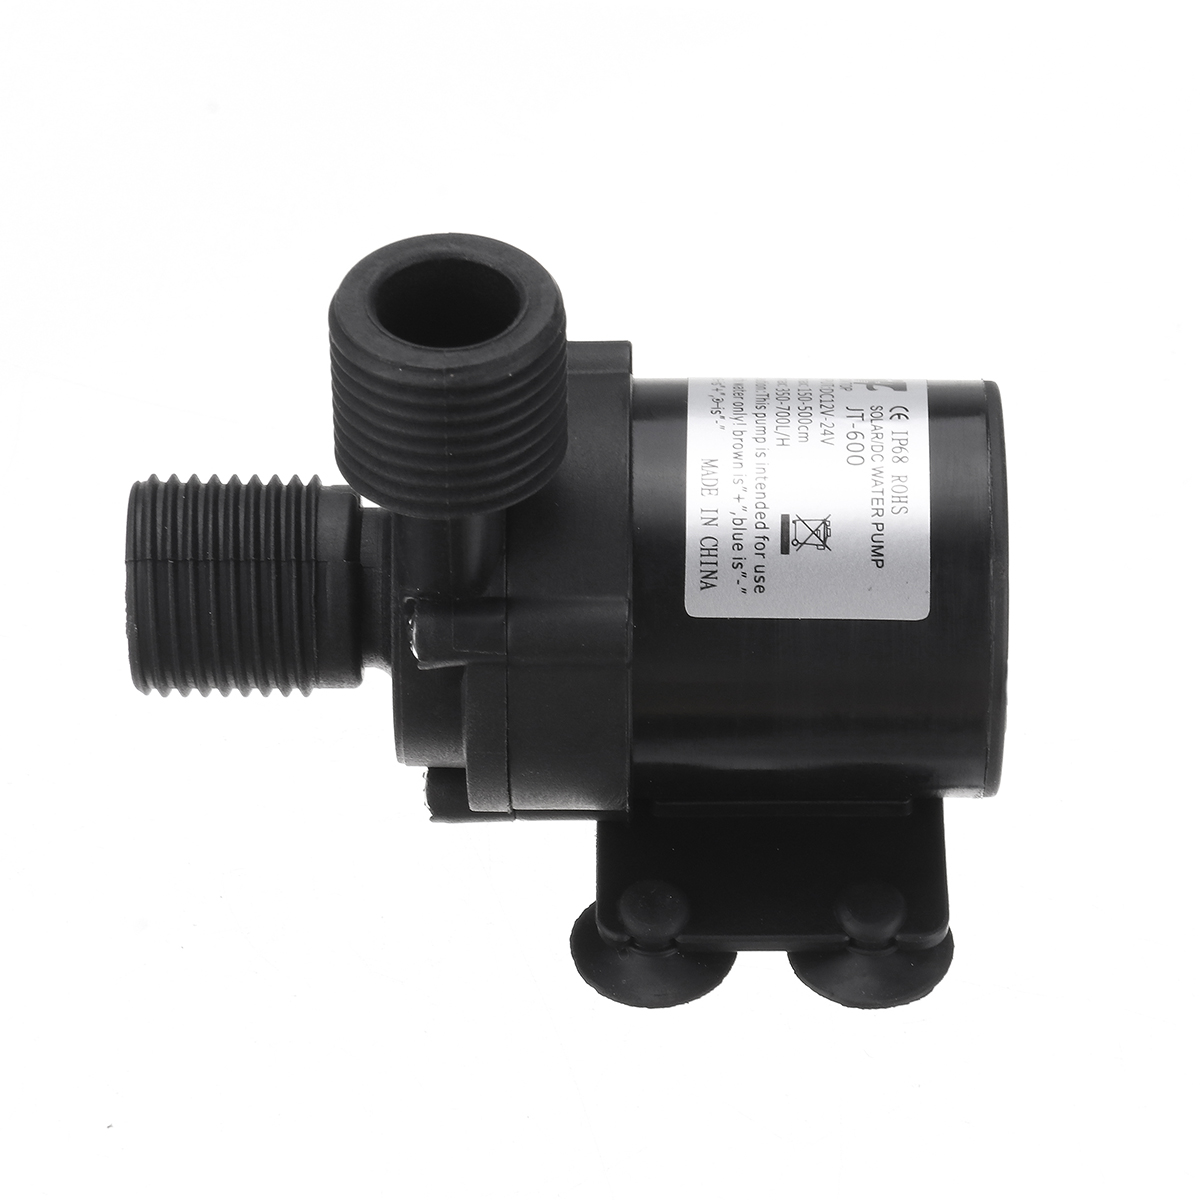 24V12V-Hot-Water-Pump-for-Circulating-Micro-DC-Water-Pump-With-12-Inch-Threaded-Multifunction-Brushl-1435180-6